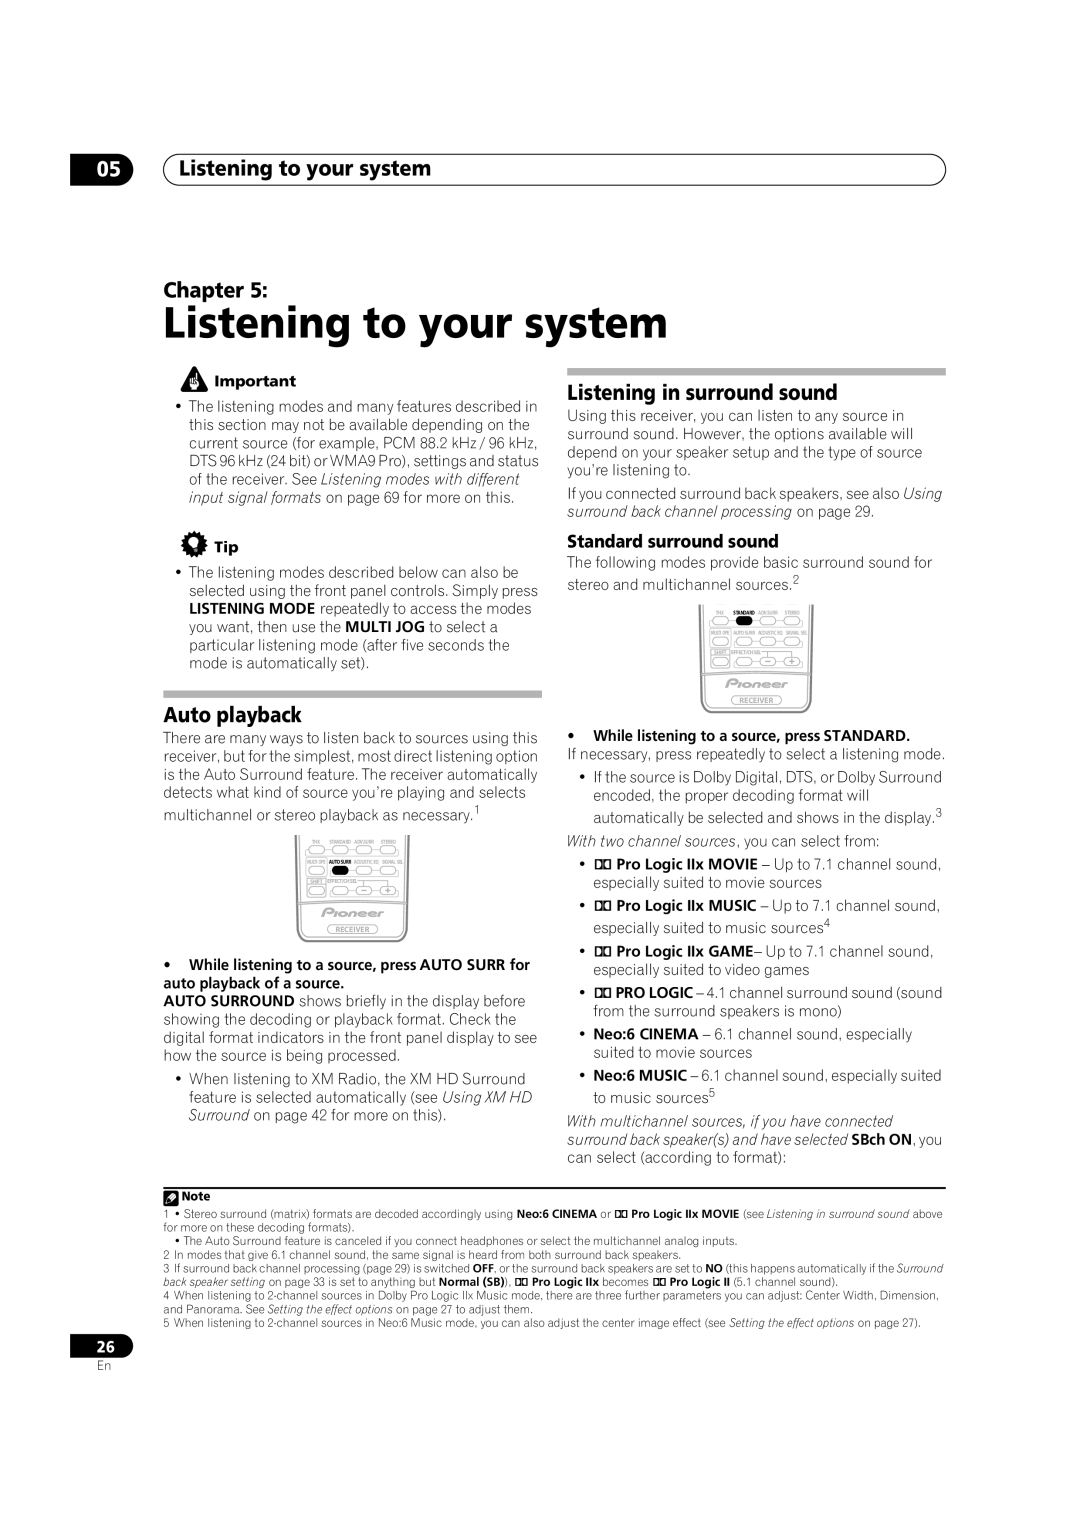 Classe Audio VSX-80TXV-S manual 05Listening to your system Chapter, Auto playback, Listening in surround sound 